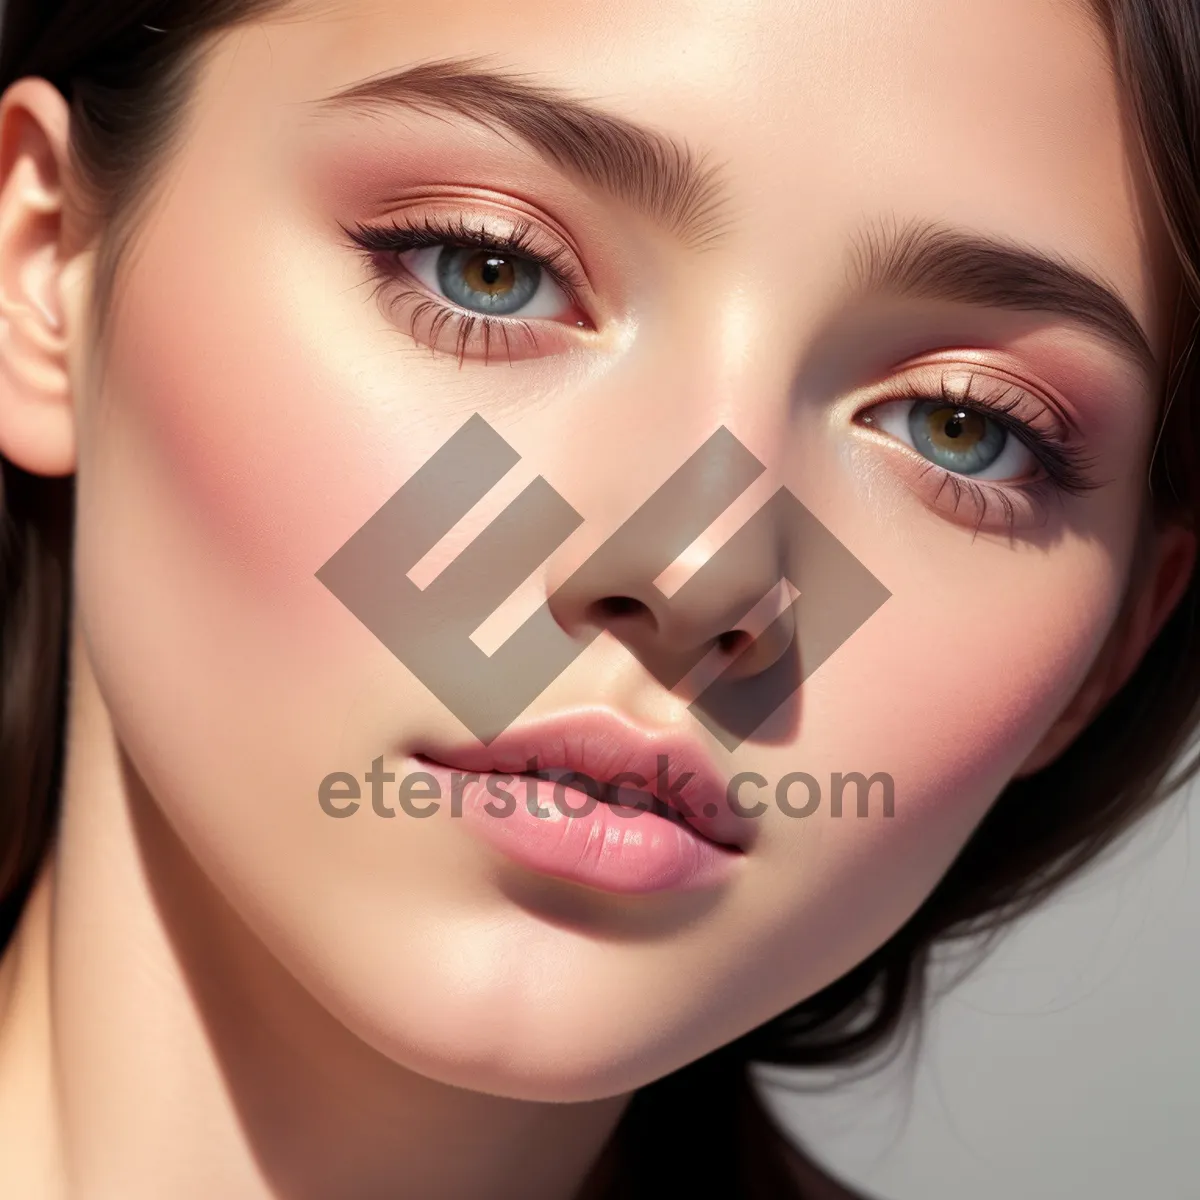 Picture of Fashionable Brunette with Sensual Makeup and Attractive Eyes